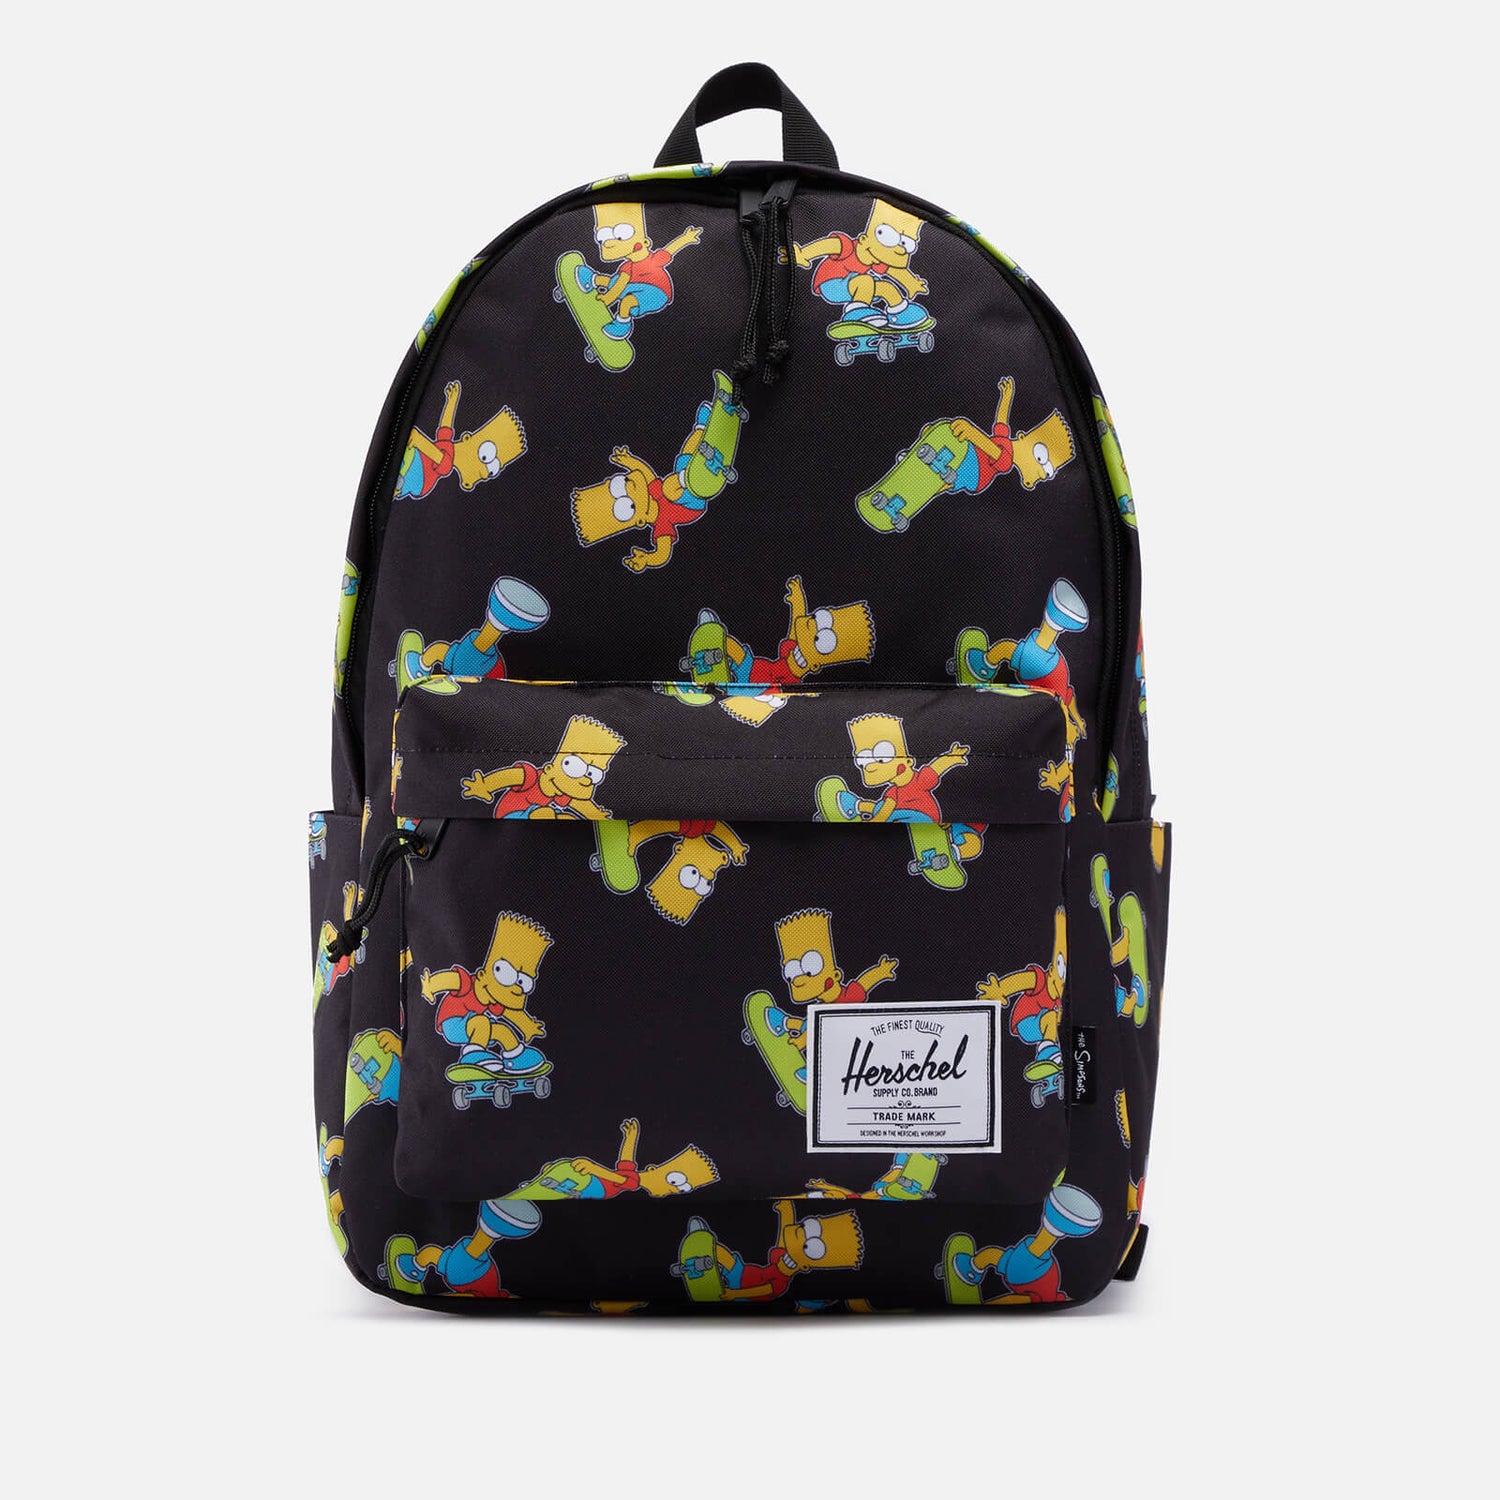 Herschel Supply Co. X The Simpsons XL Printed Canvas Backpack